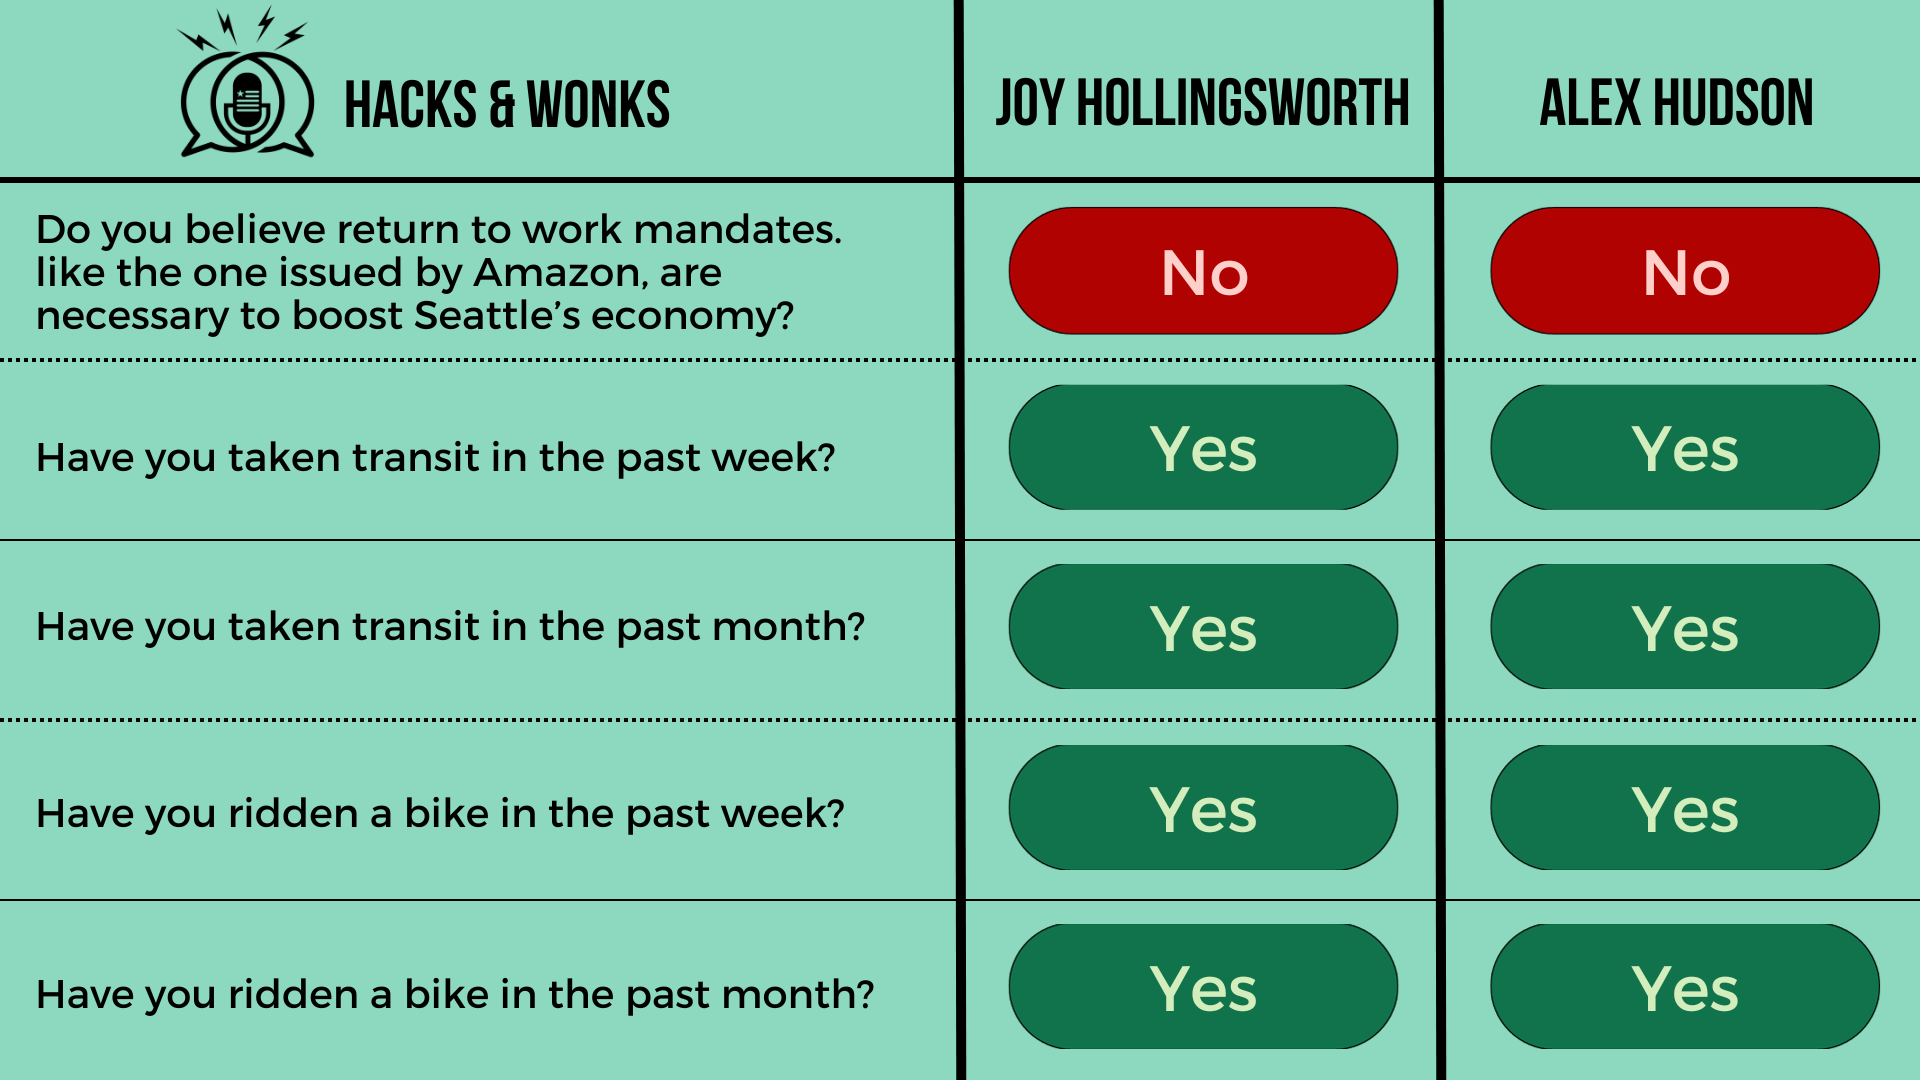 Q: Do you believe return to work mandates. like the one issued by Amazon, are necessary to boost Seattle’s economy? Joy Hollingsworth: No, Alex Hudson: No  Q: Have you taken transit in the past week? Joy Hollingsworth: Yes, Alex Hudson: Yes  Q: Have